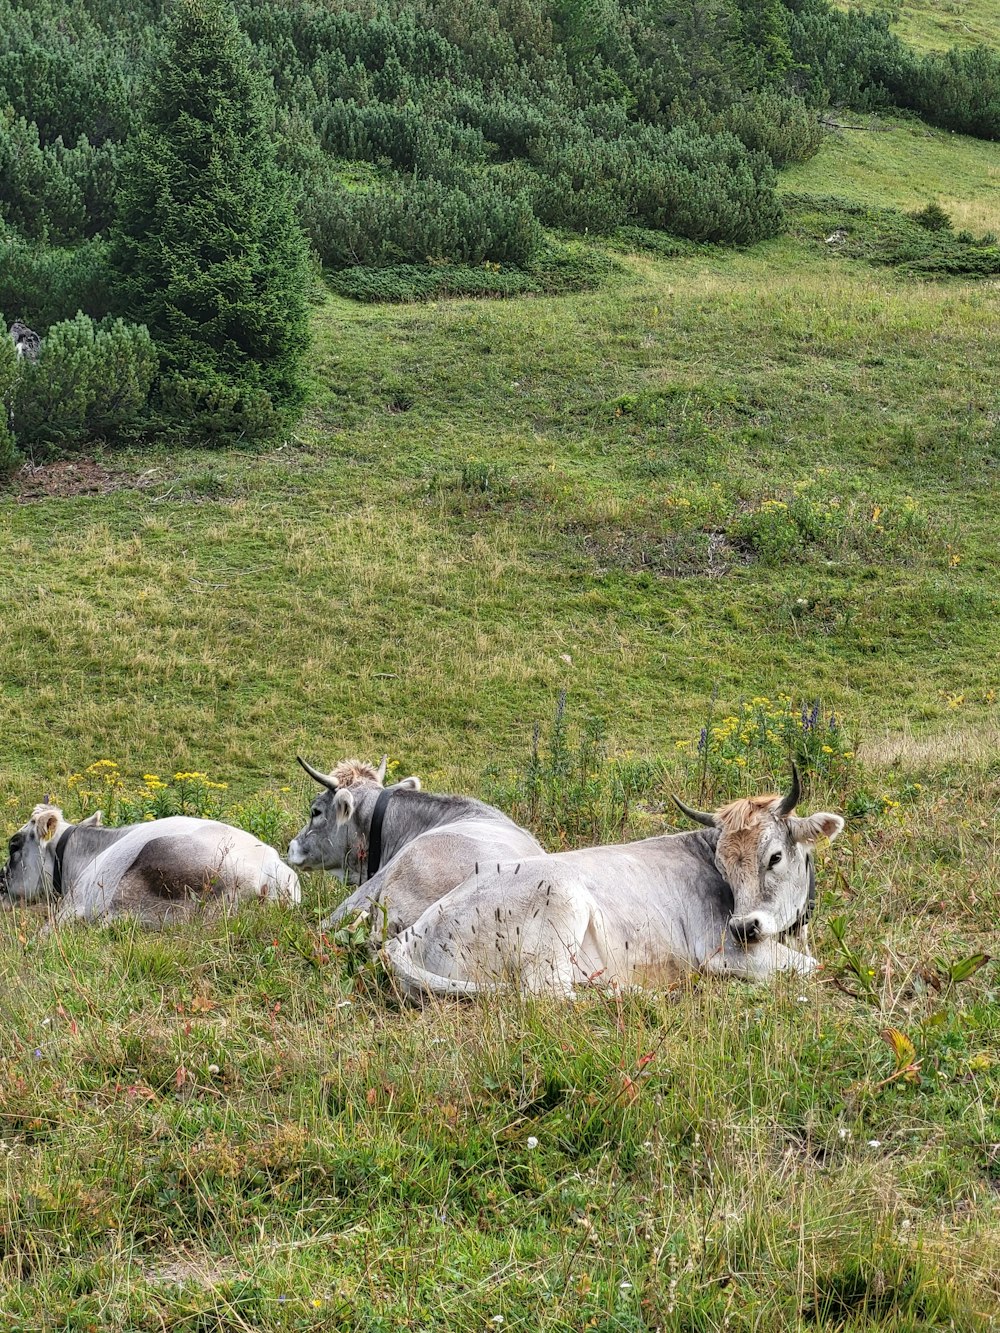 three cows laying down in a grassy field